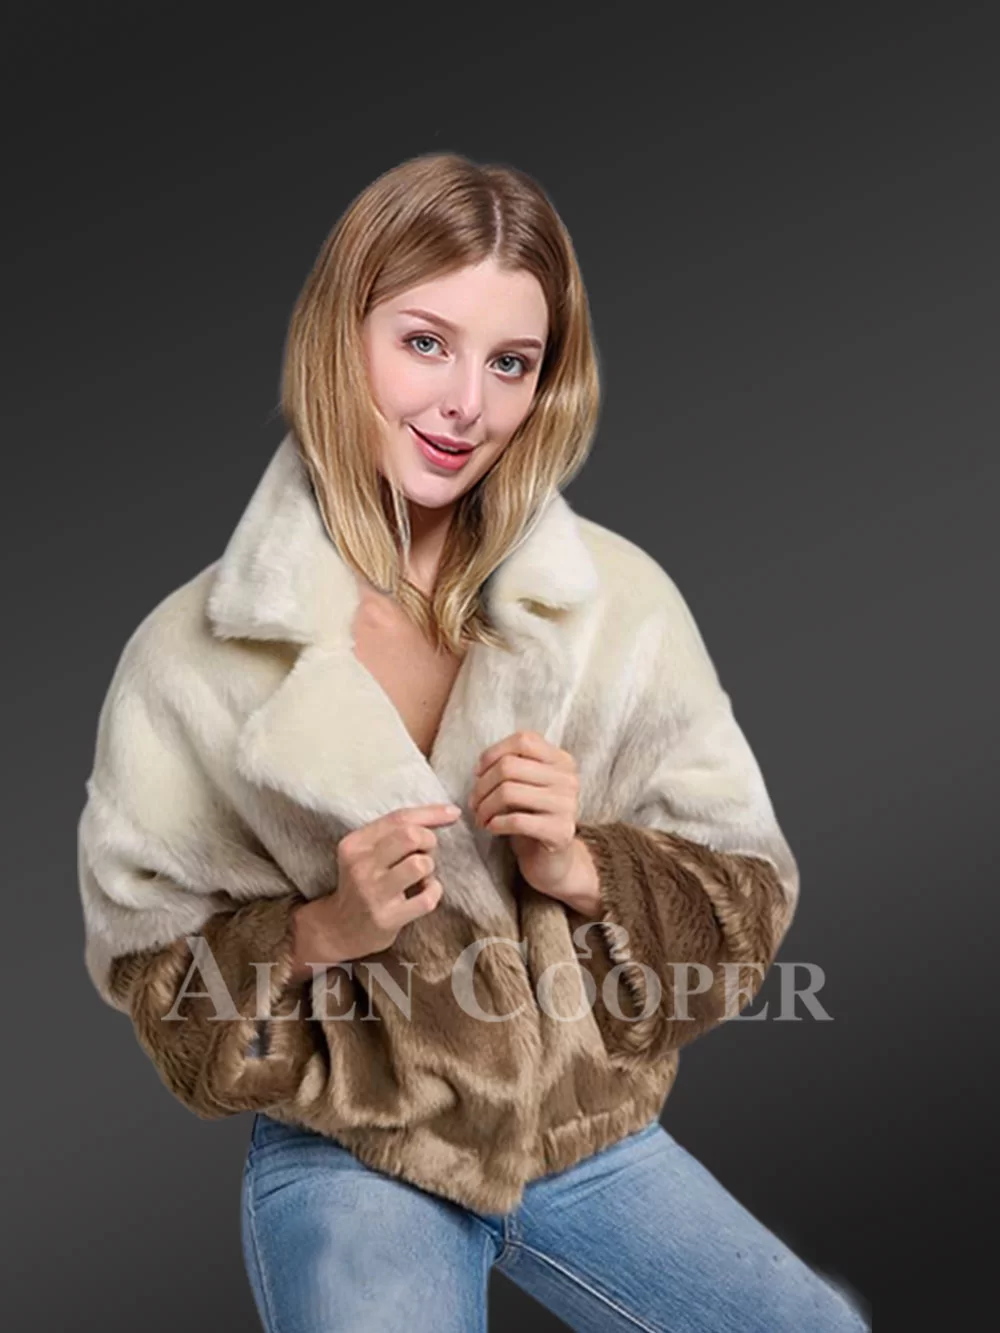 Benefits of real fur - 3 reasons to wear a real fur coat